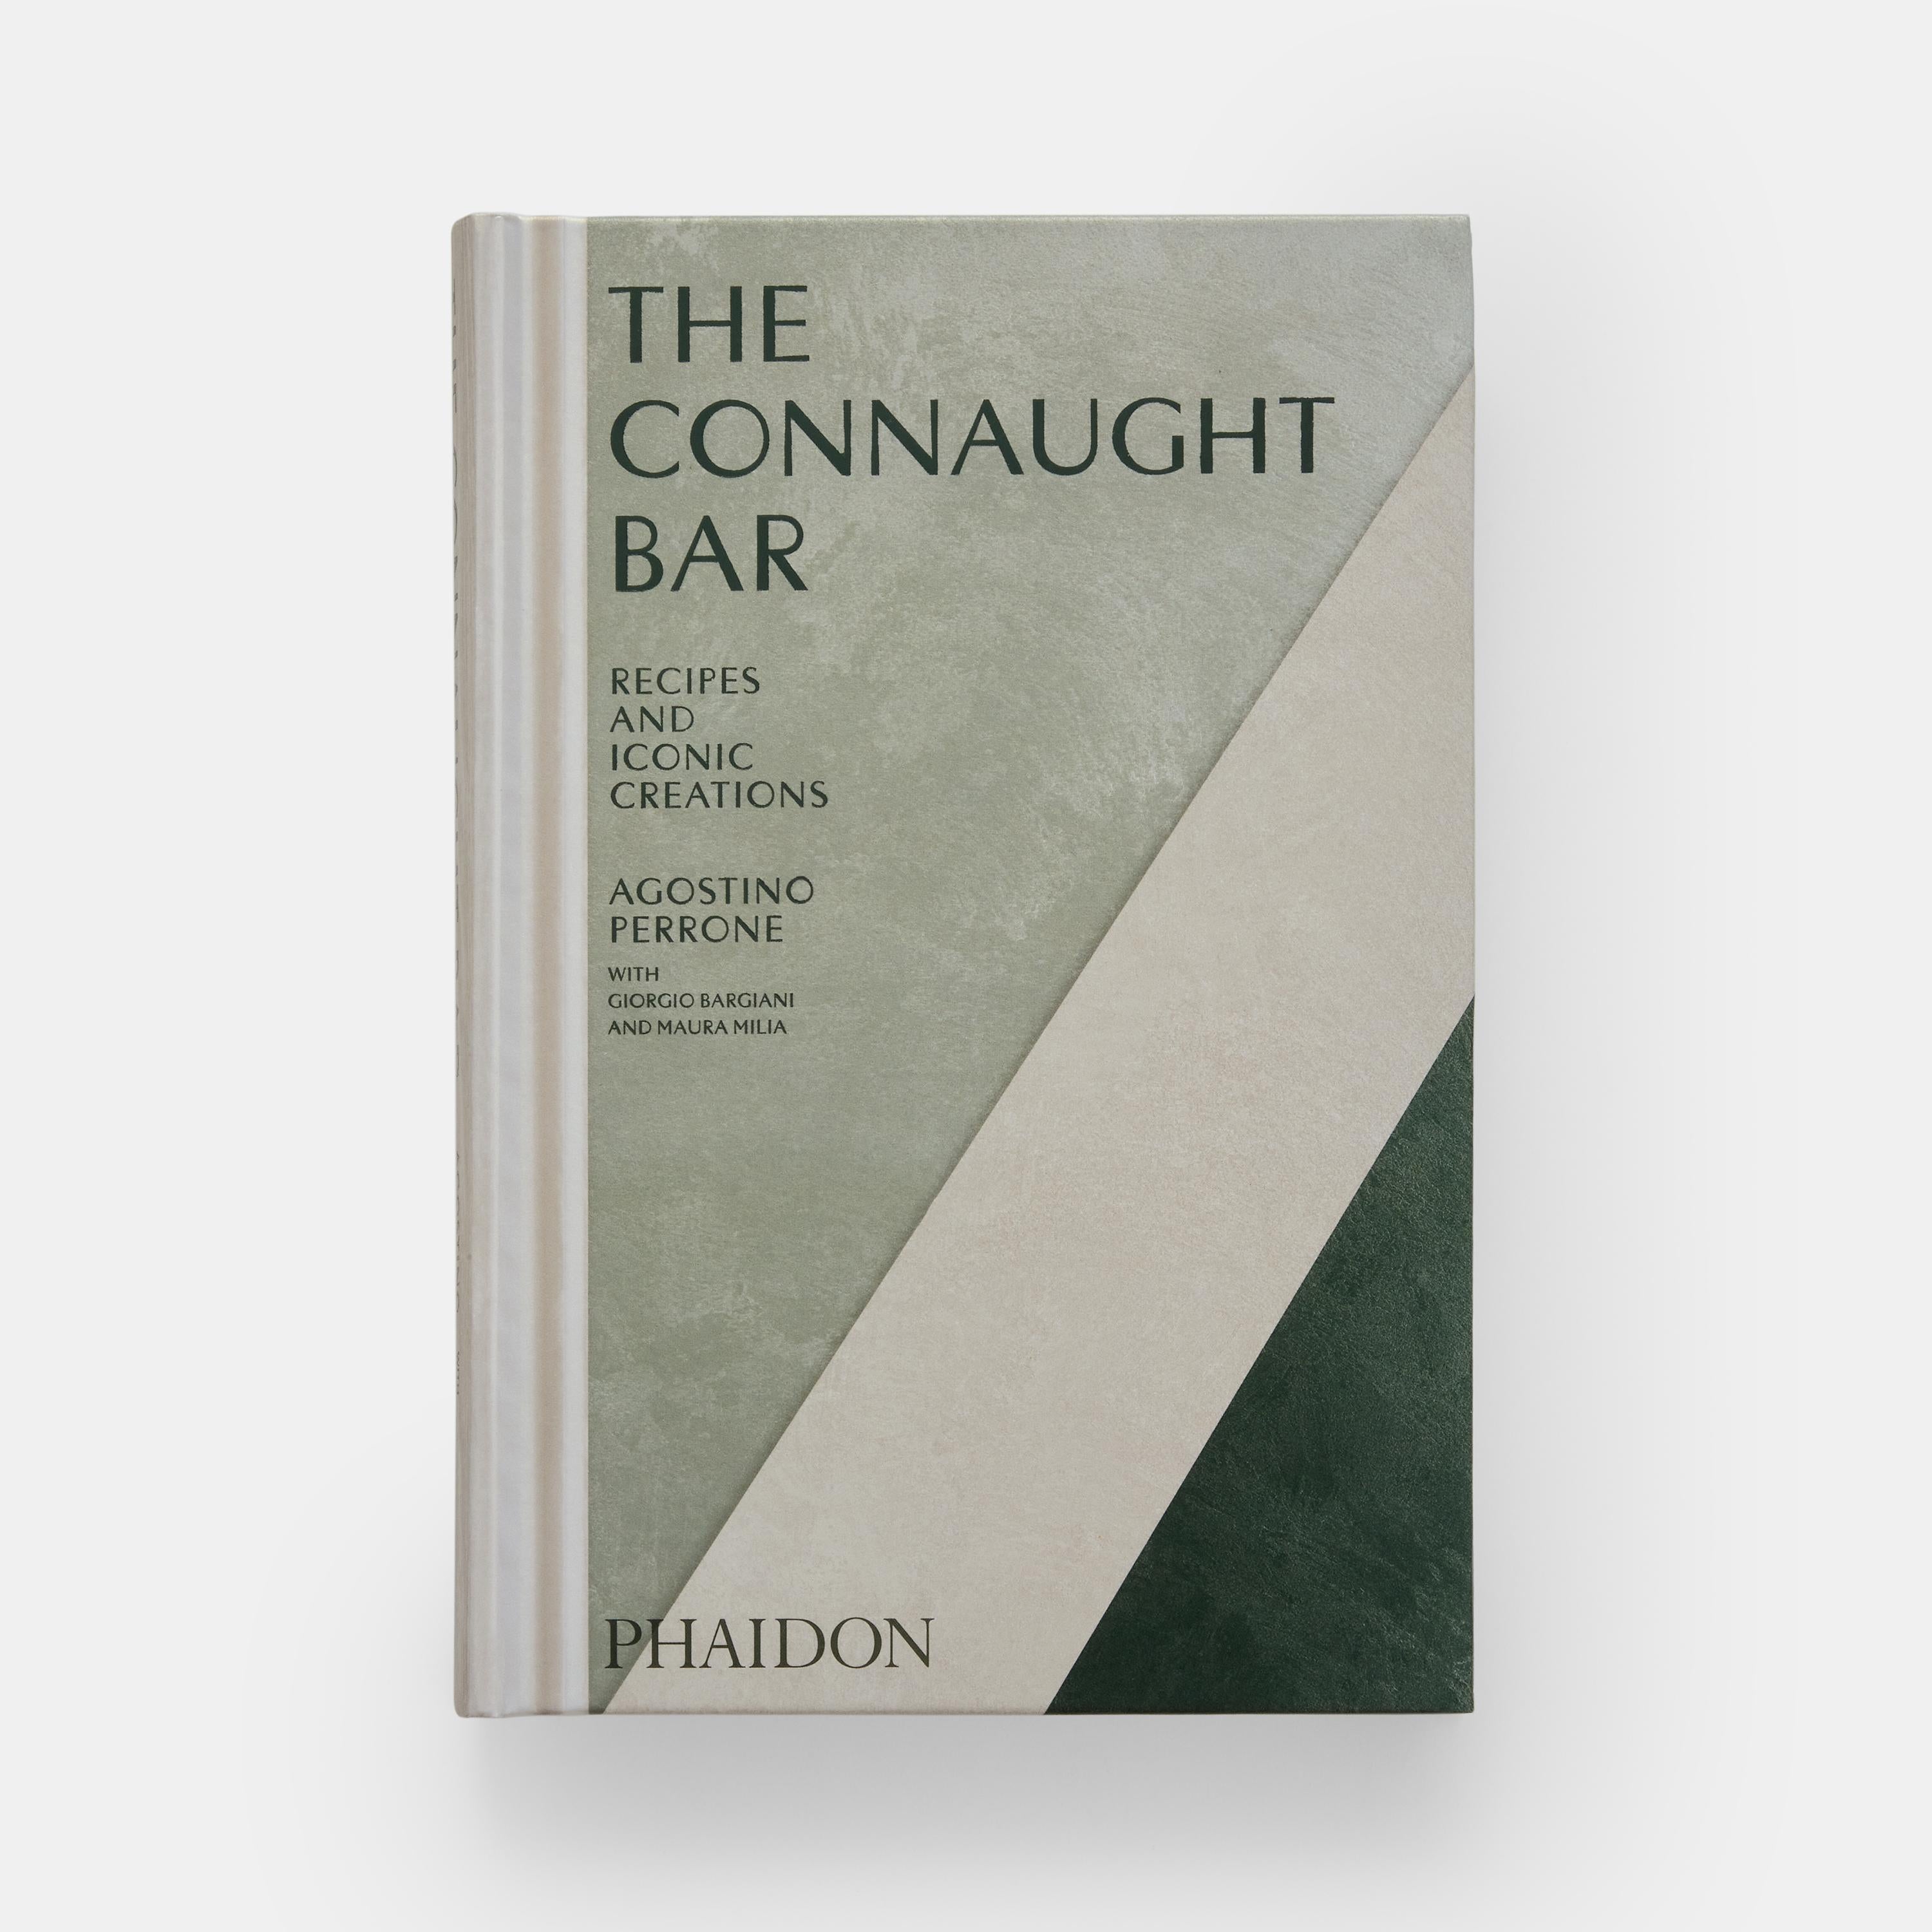 ‘When I think about the Connaught Bar, I return again and again to the hospitality, the methodology and the quality experiences that I have experienced there over the past decade.’ – Massimo Bottura

Recreate the Connaught Bar’s signature cocktails